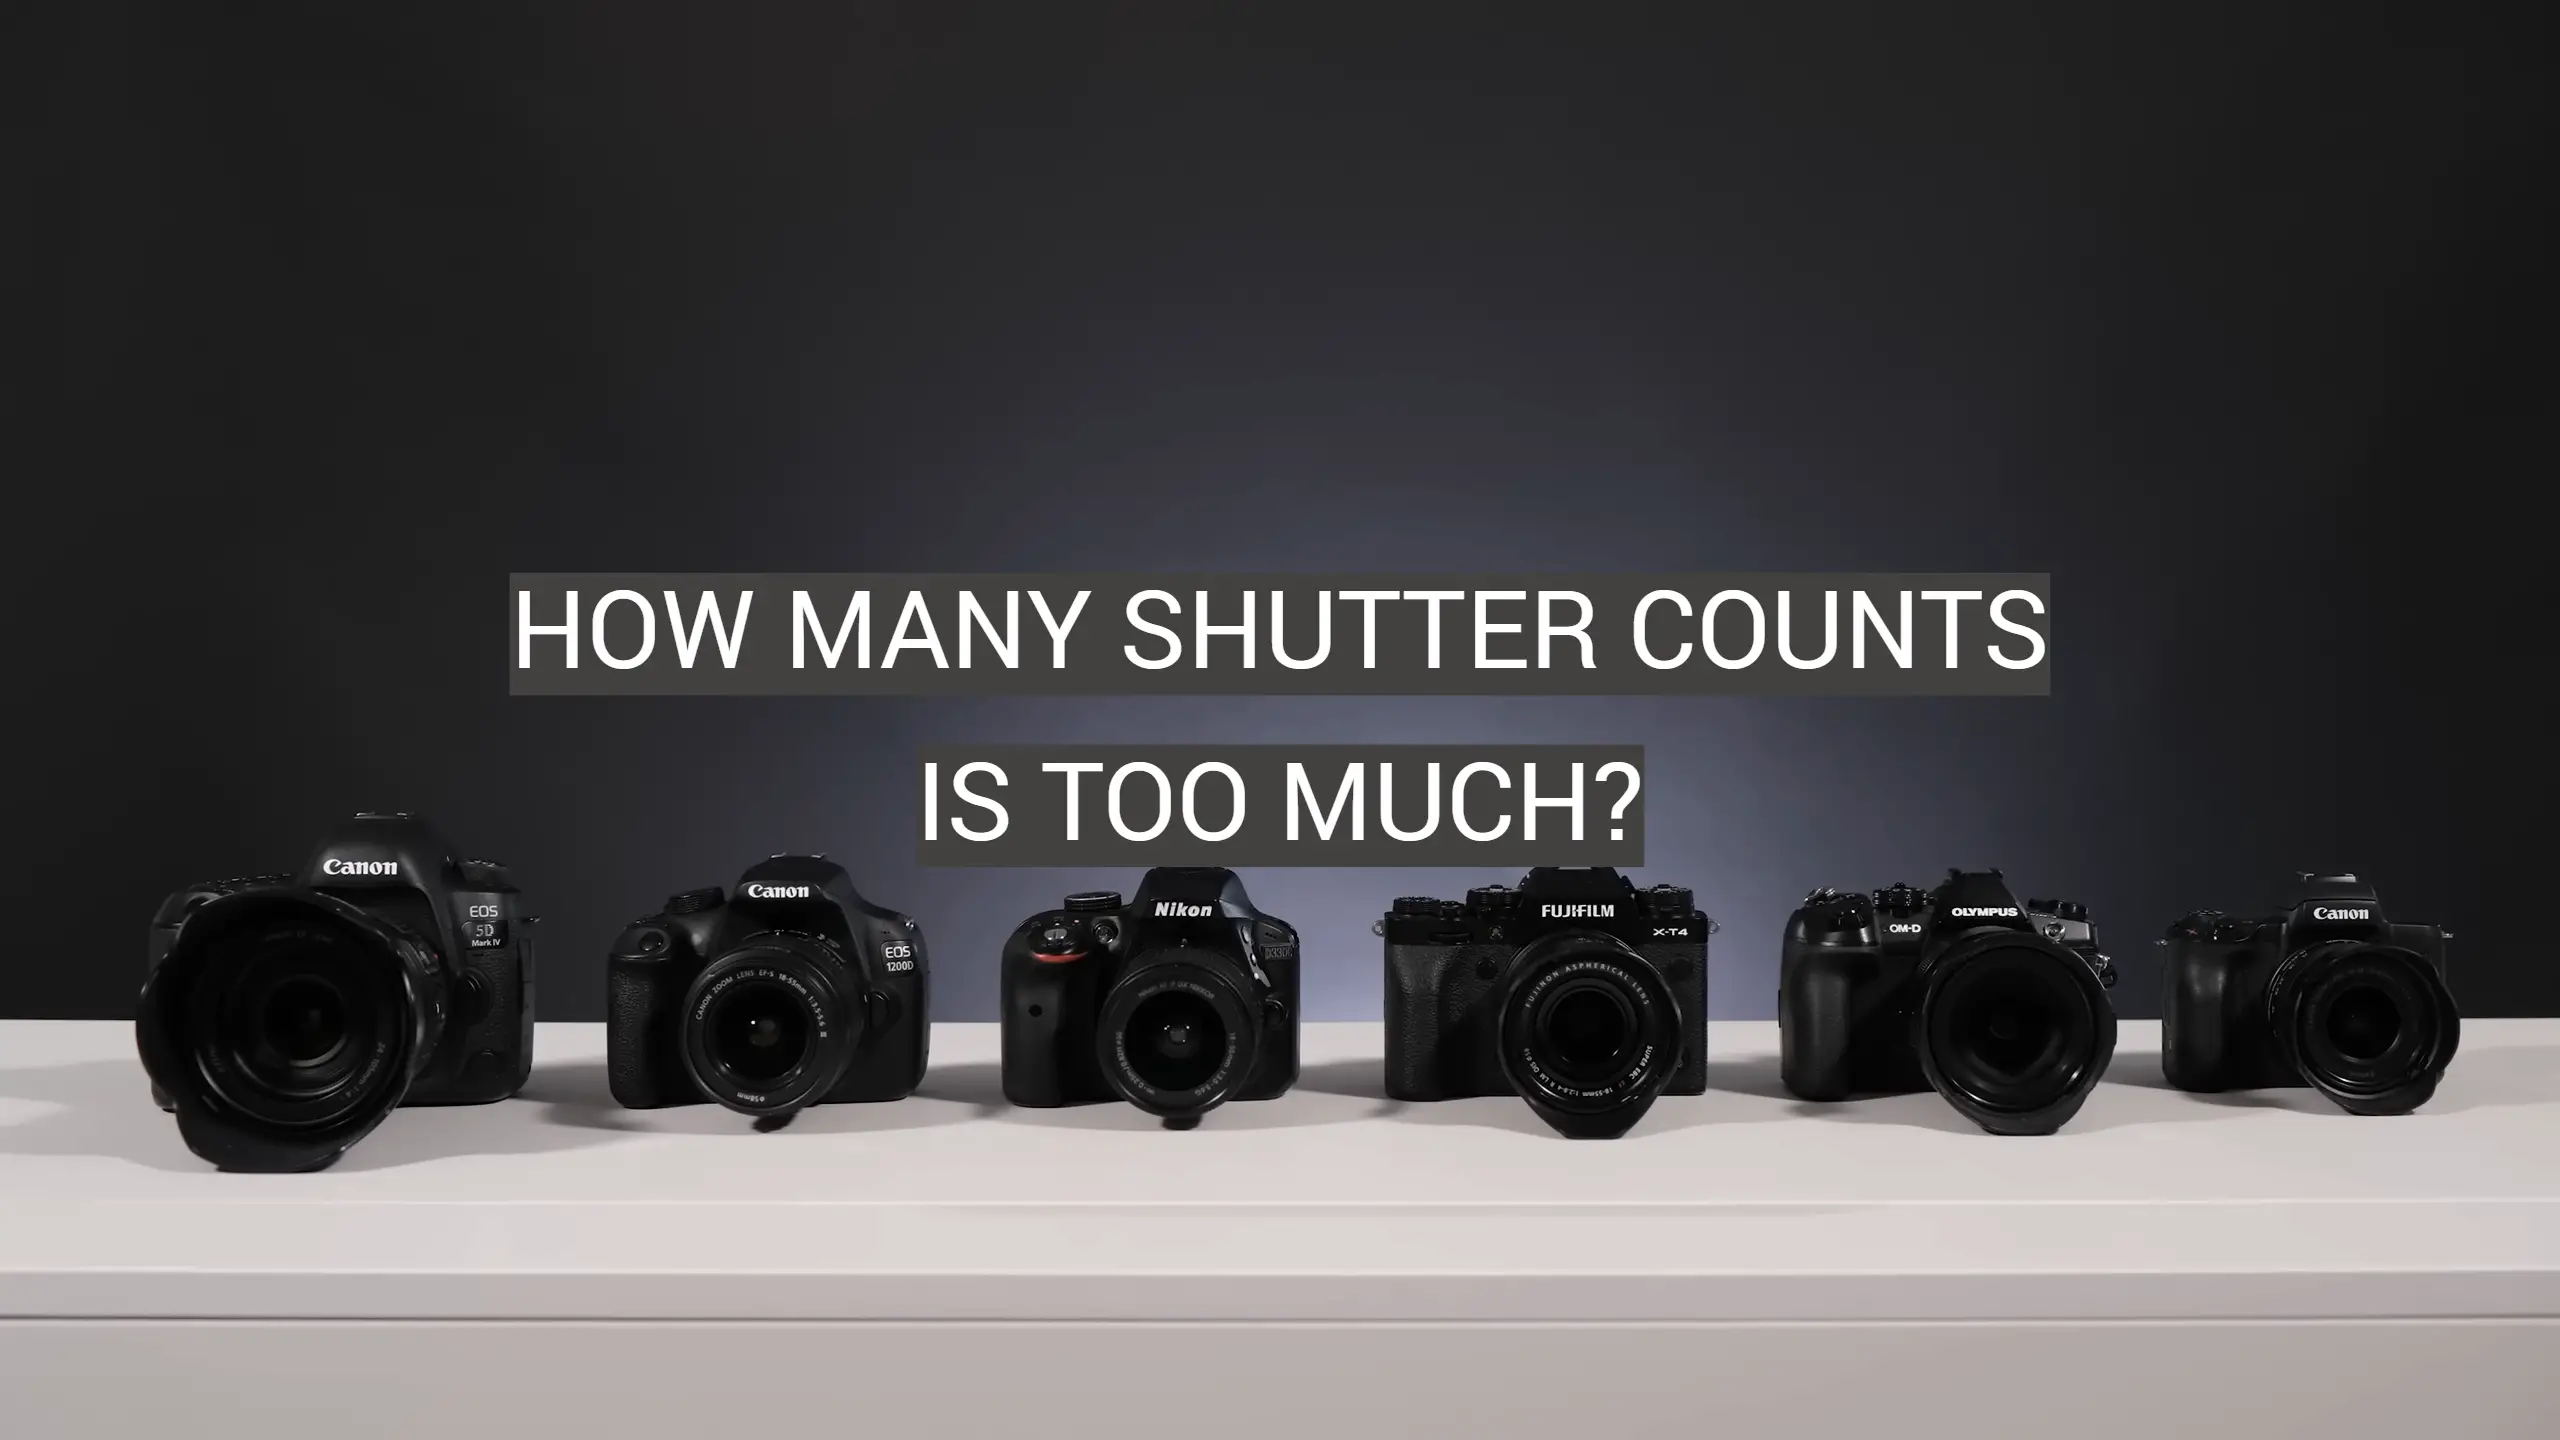 How Many Shutter Counts Is Too Much?